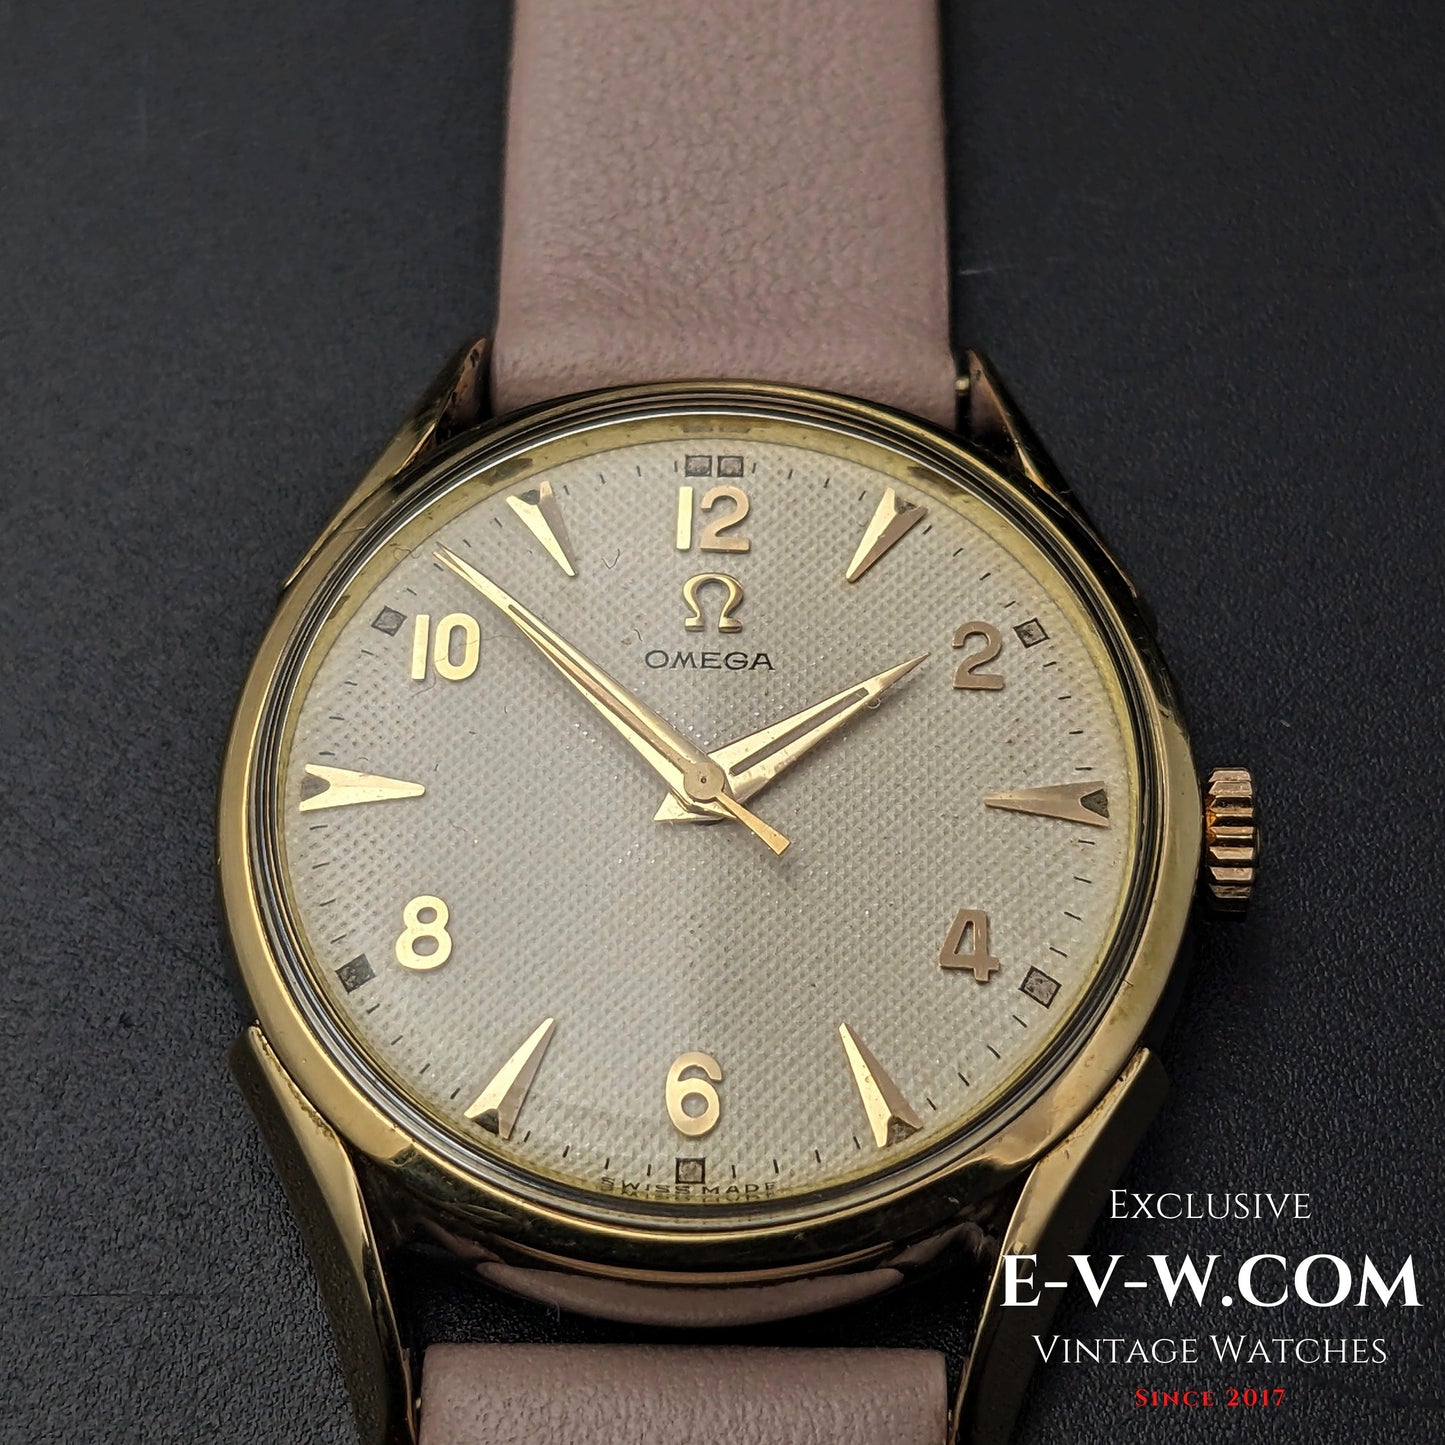 72 Years Old Vintage Omega Rare Guilloche-Honeucomb Dial Ref. 2667 4SC / Cal. 420 / Vintage 1952